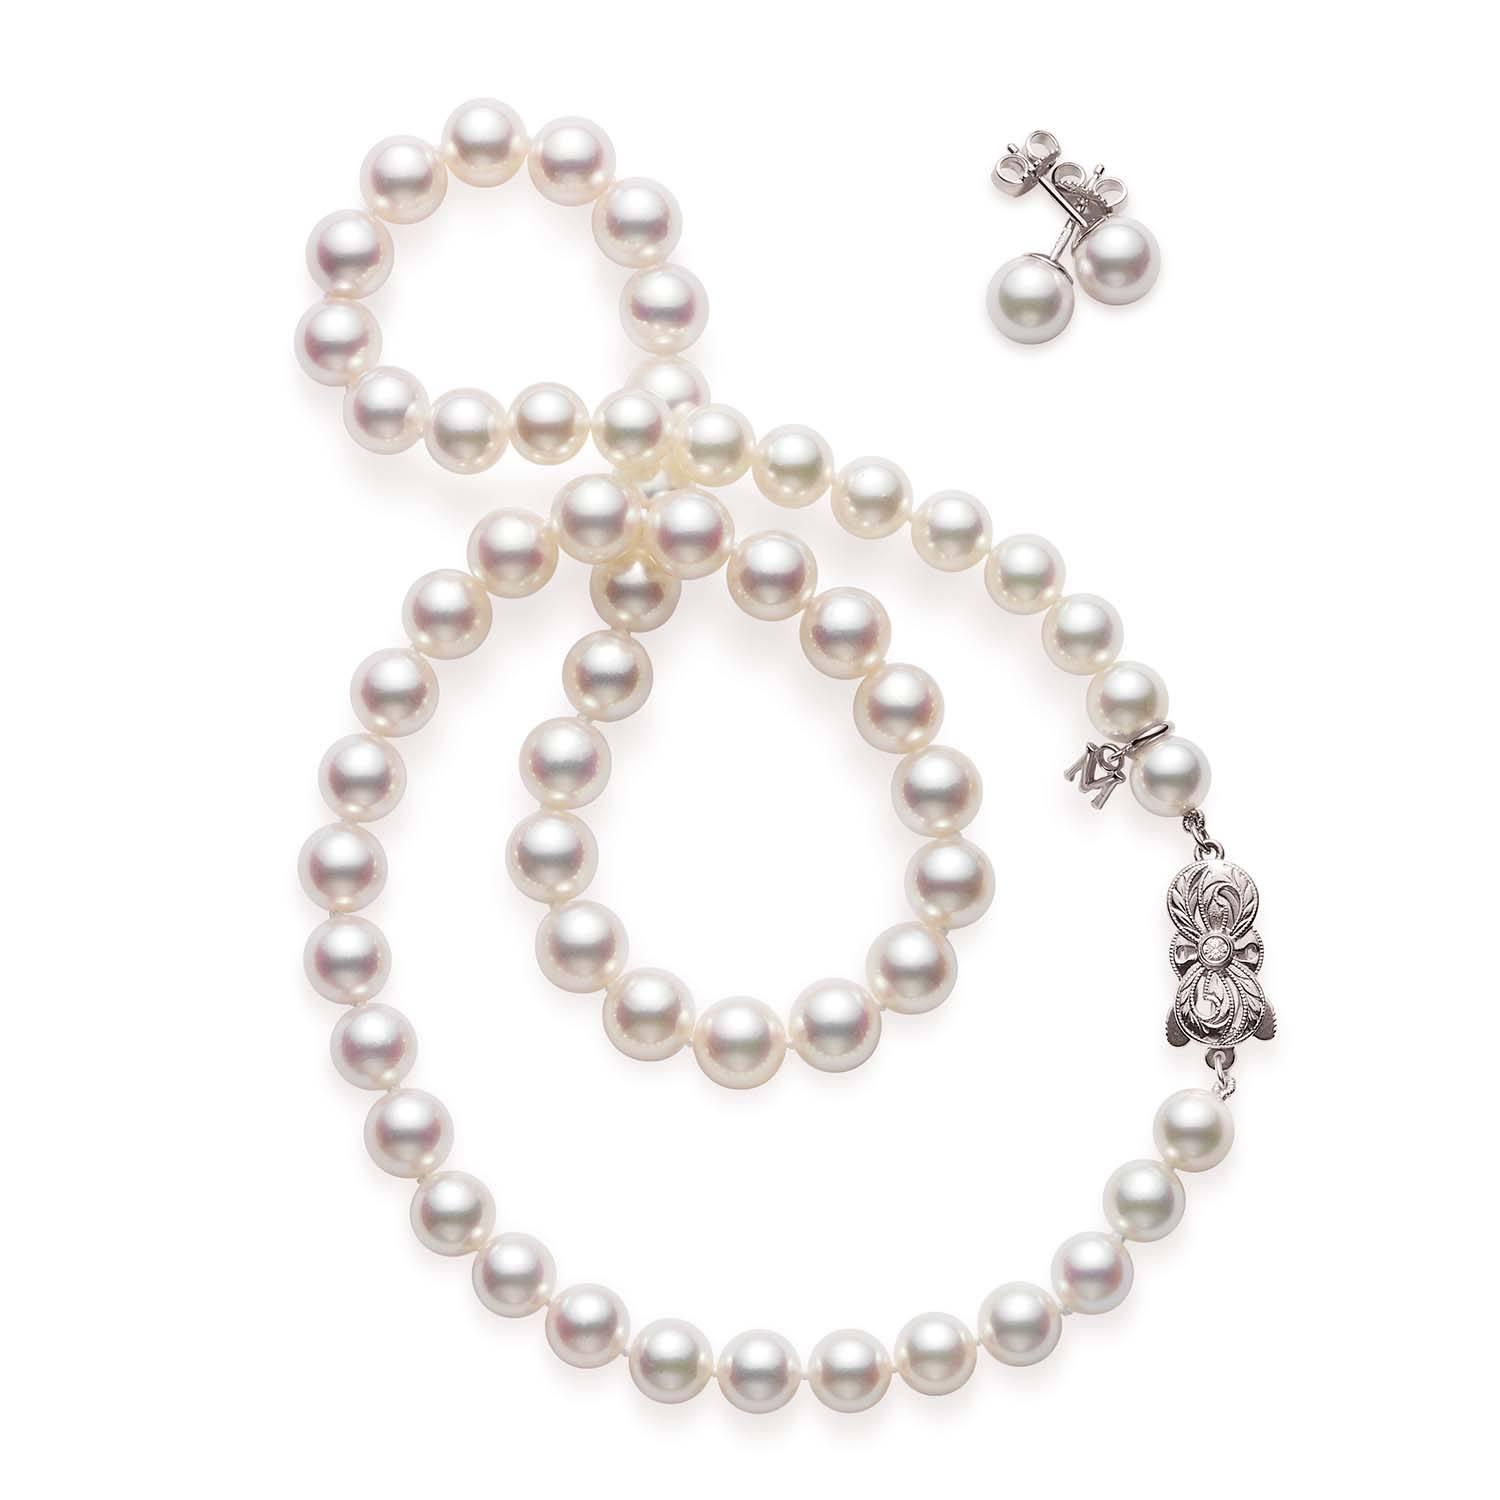 Mikimoto "A1" Akoya Cultured Pearl Two-Piece Gift Set